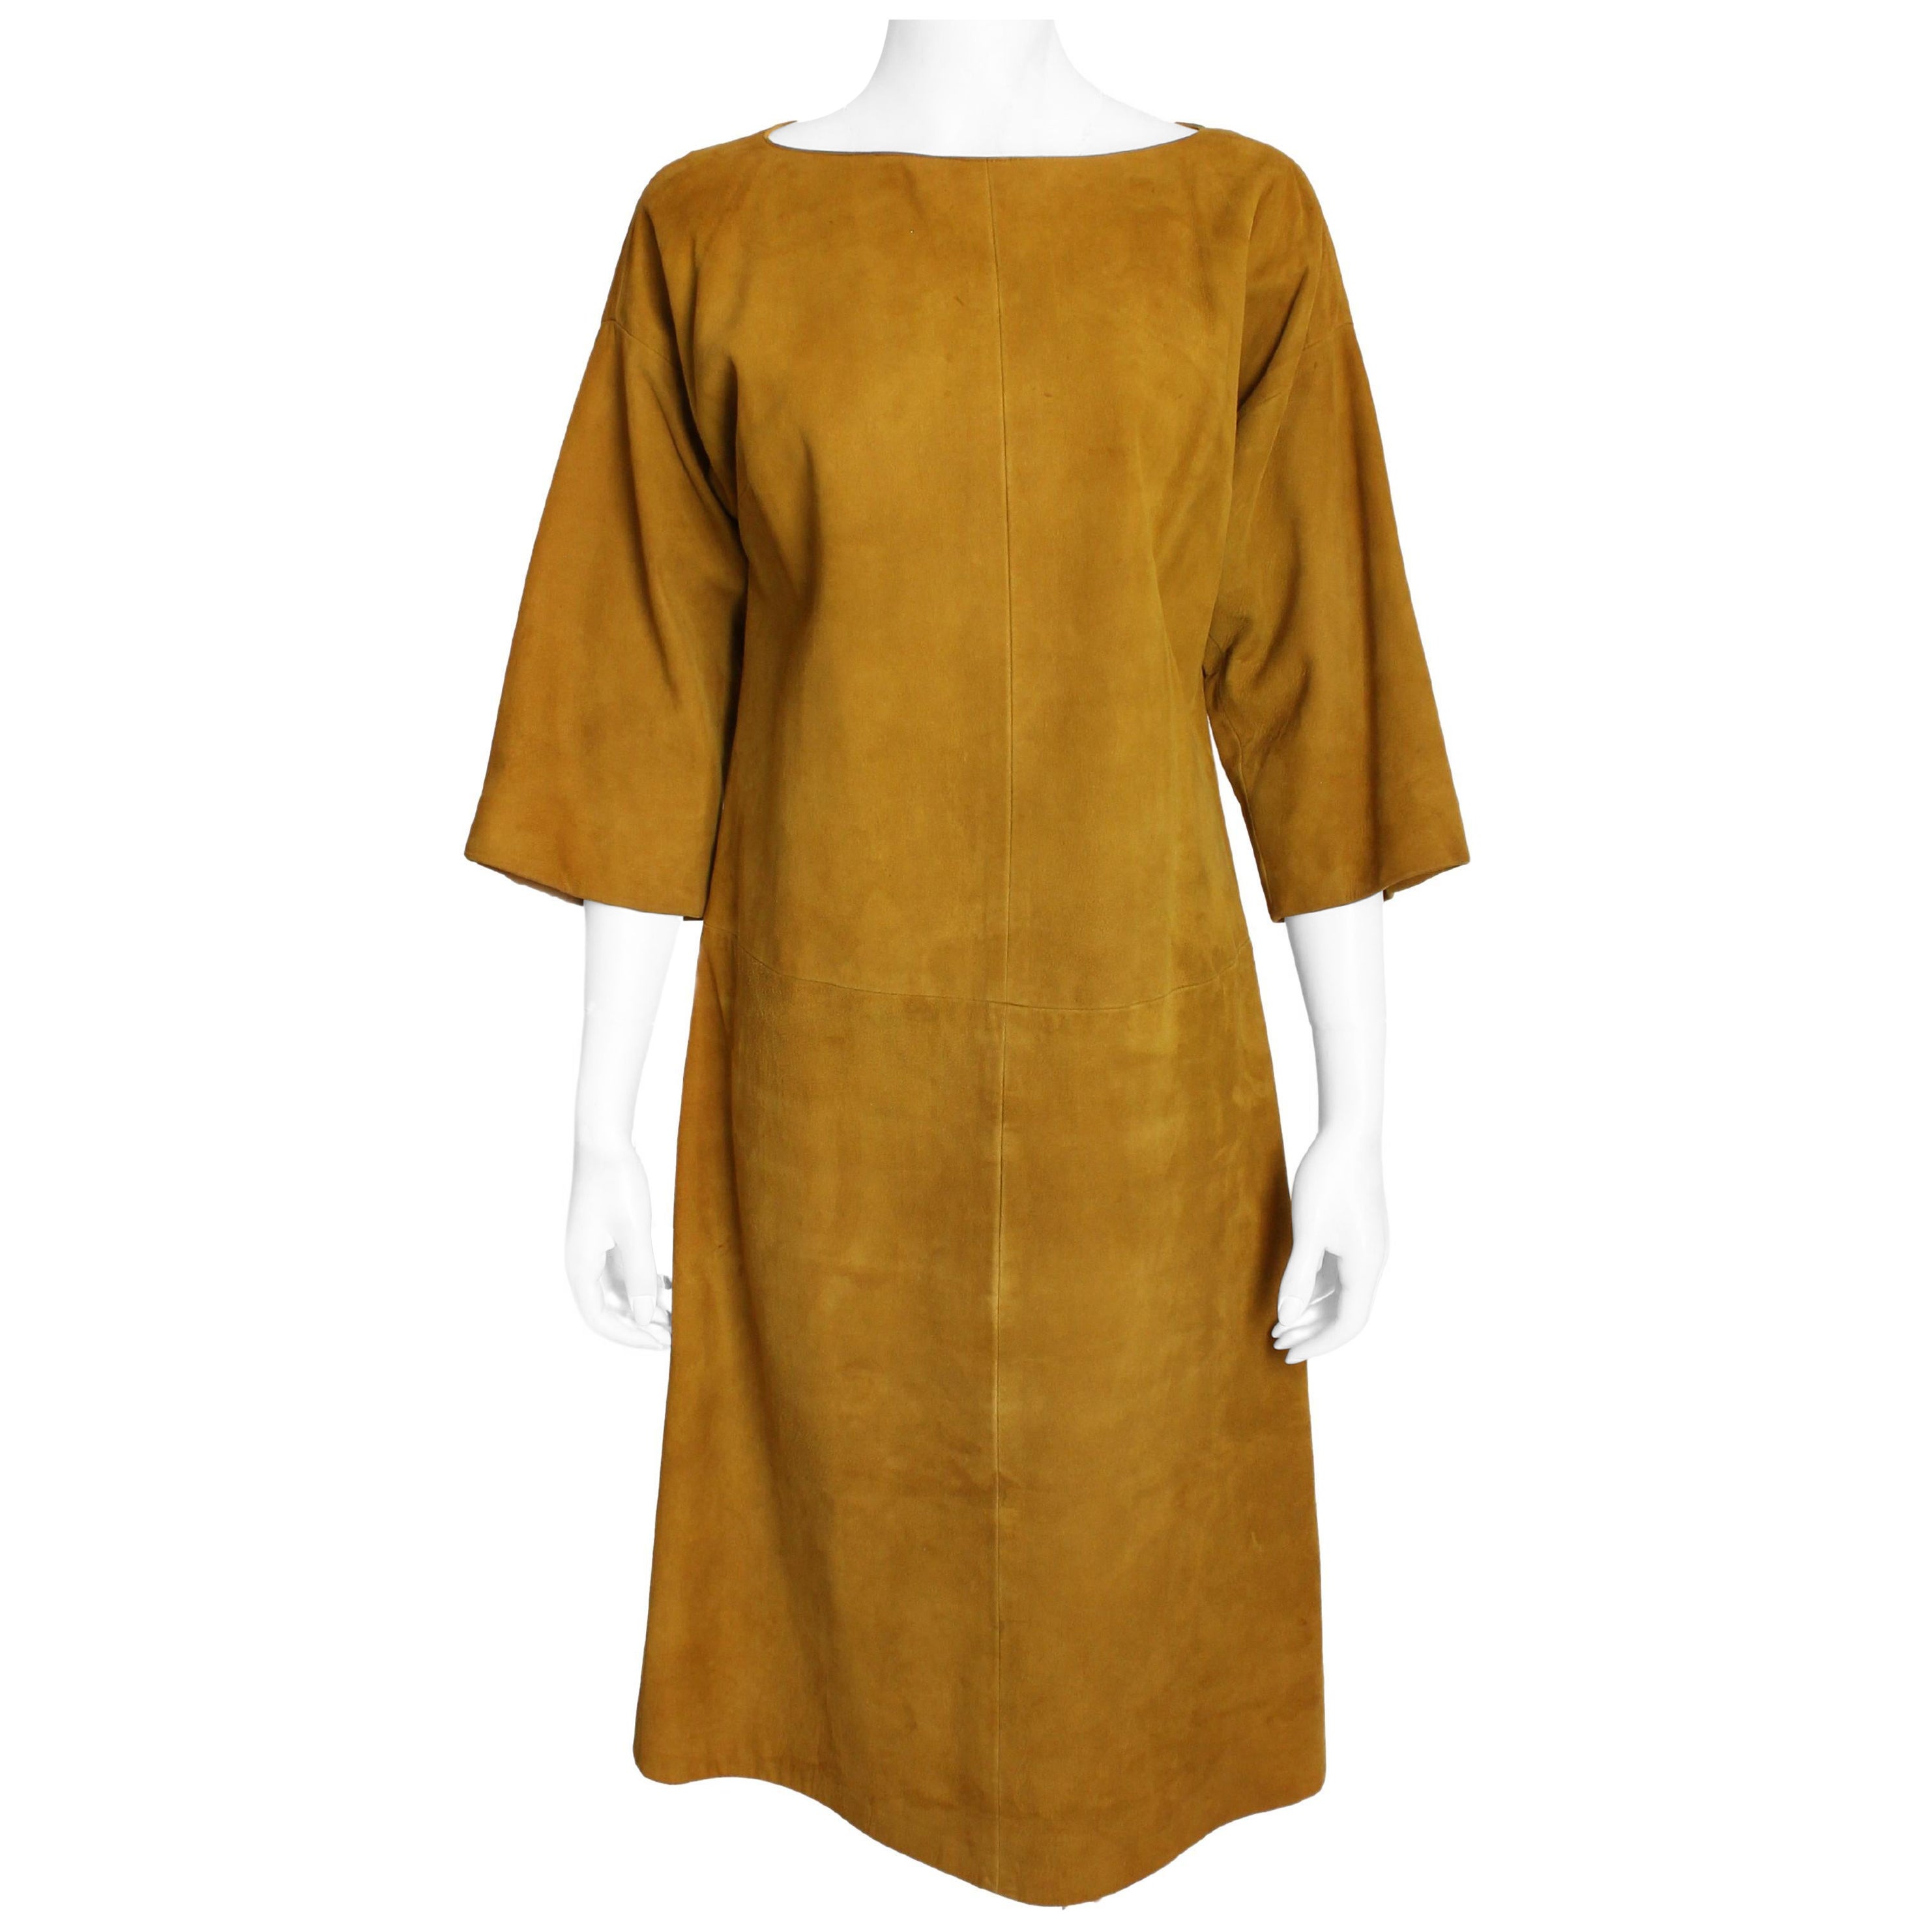 Bonnie Cashin for Sills Dress Gold Suede Leather Kimono Style Sleeves Rare 1960s For Sale